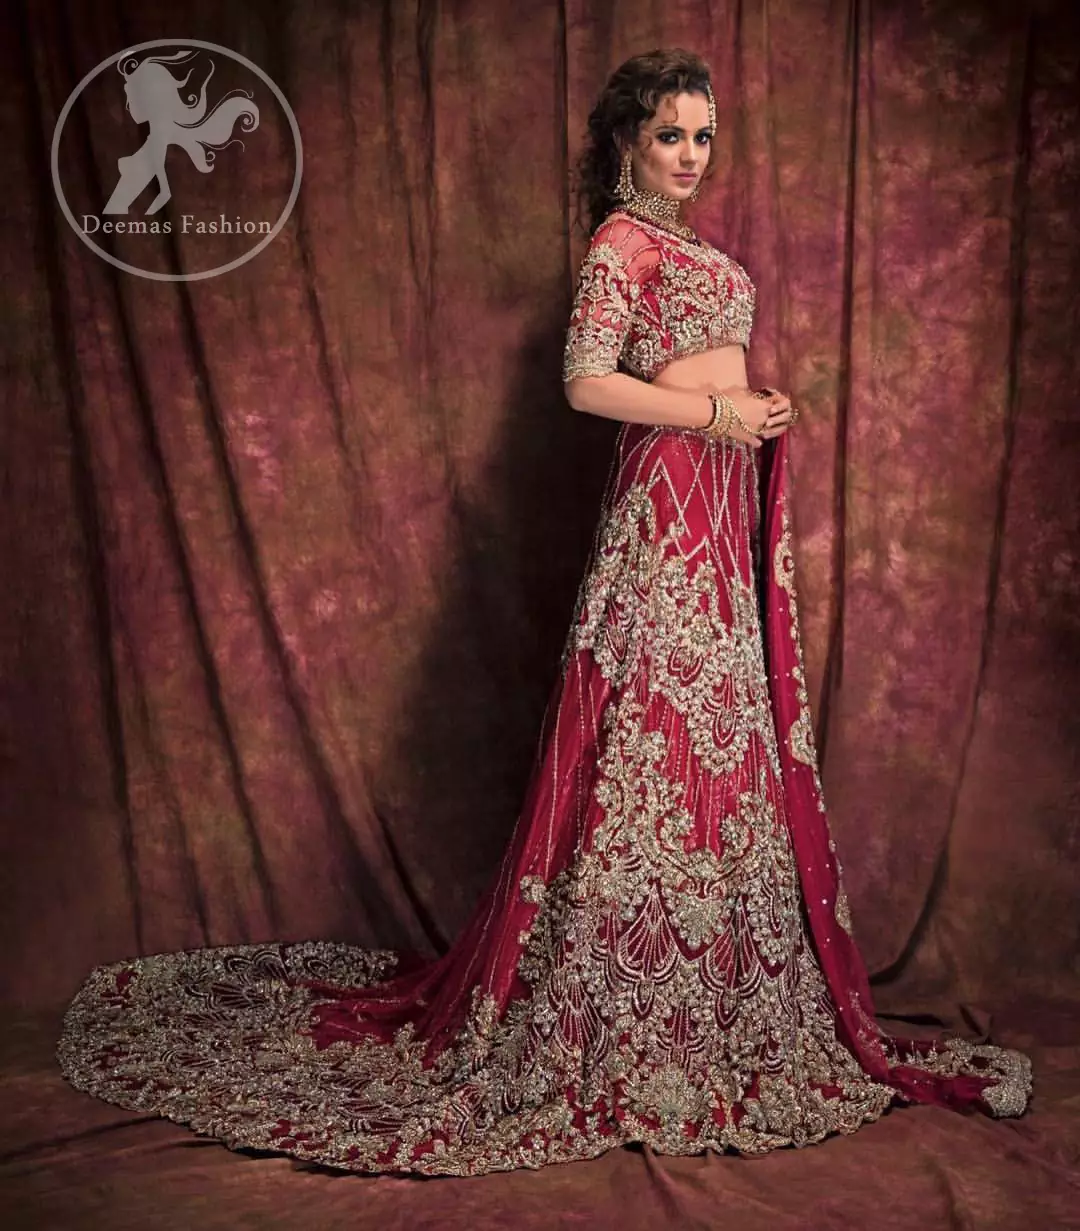 Exude glamour in this trendy lehnga with light golden and silver embroidery instantly draws attention. The blouse is enhanced with golden and silver kora, dabka, tilla, swarovski crystals and zardozi embroidery and a beautiful embellished motifs on the sleeves. Complete the look with artfully coordinated lehenga which is ornamented with a bold and captivating back trail design with a traditional intricate embroidered. The dupatta incorporates beautifully designed borders on all four sides and scattered sequins on the ground that gives the right amount of glamour to the outfit.